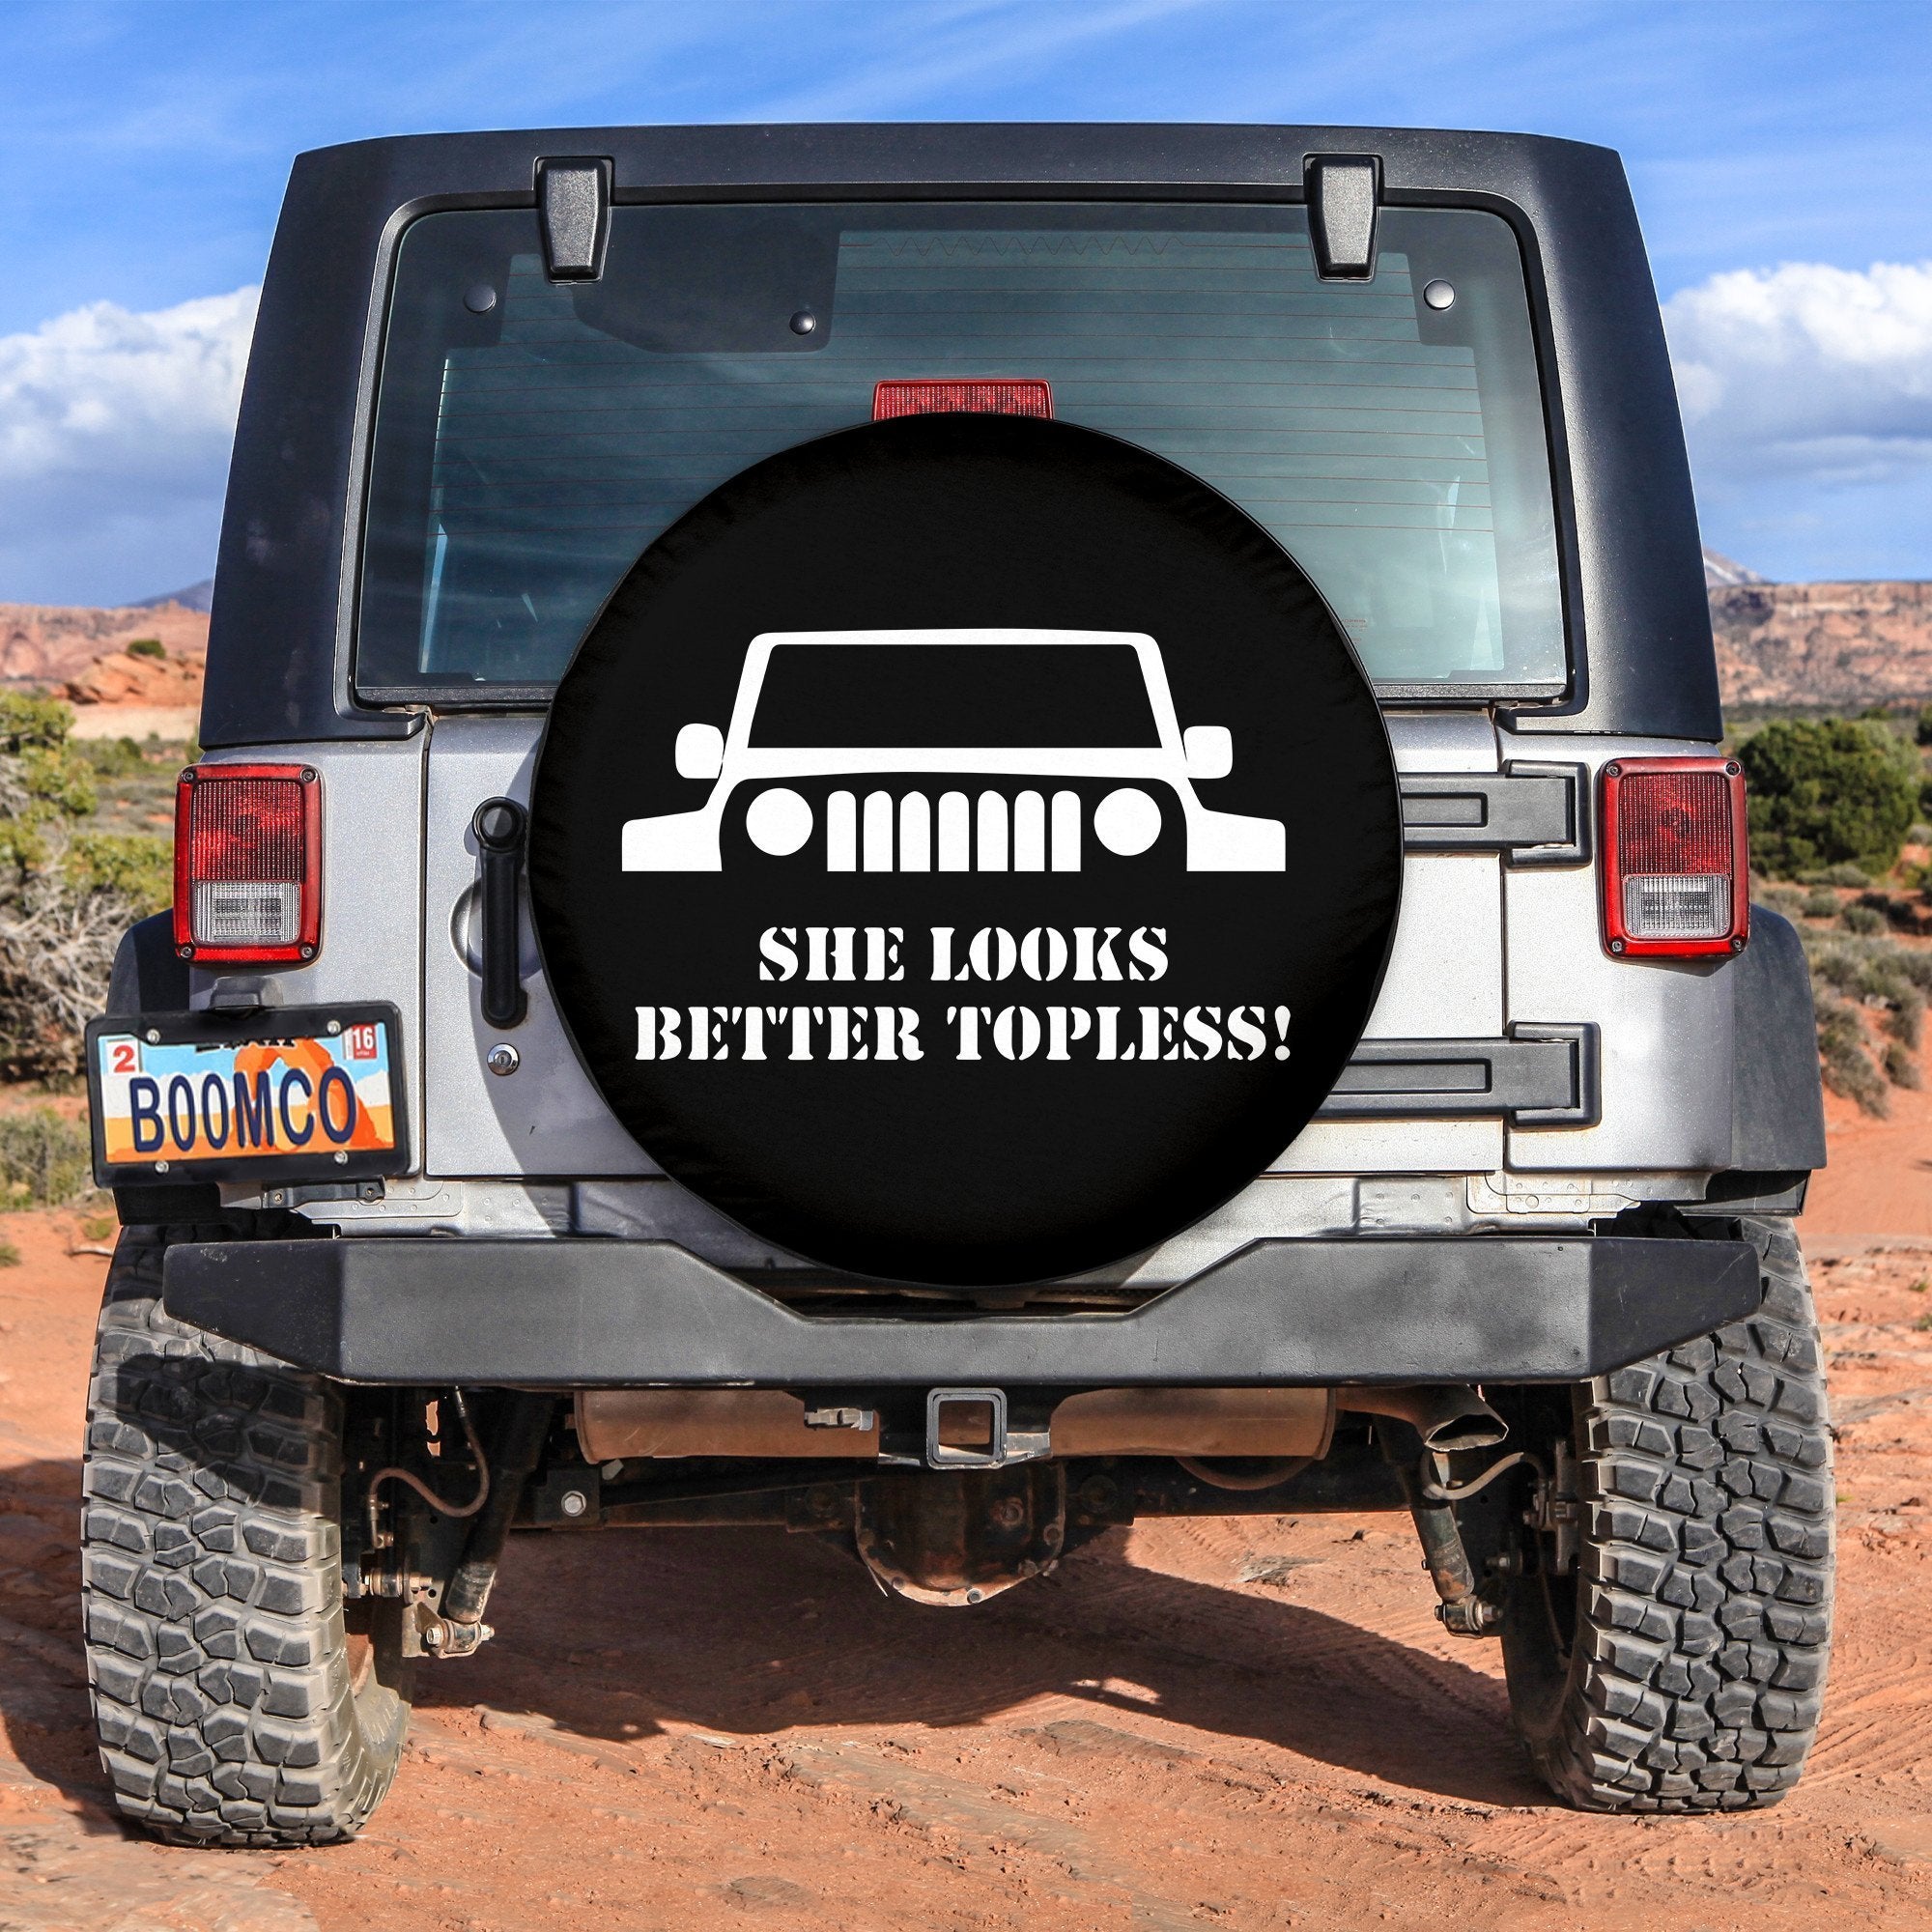 Funny She Look Better Topless Spare Tire Cover Gift For Campers